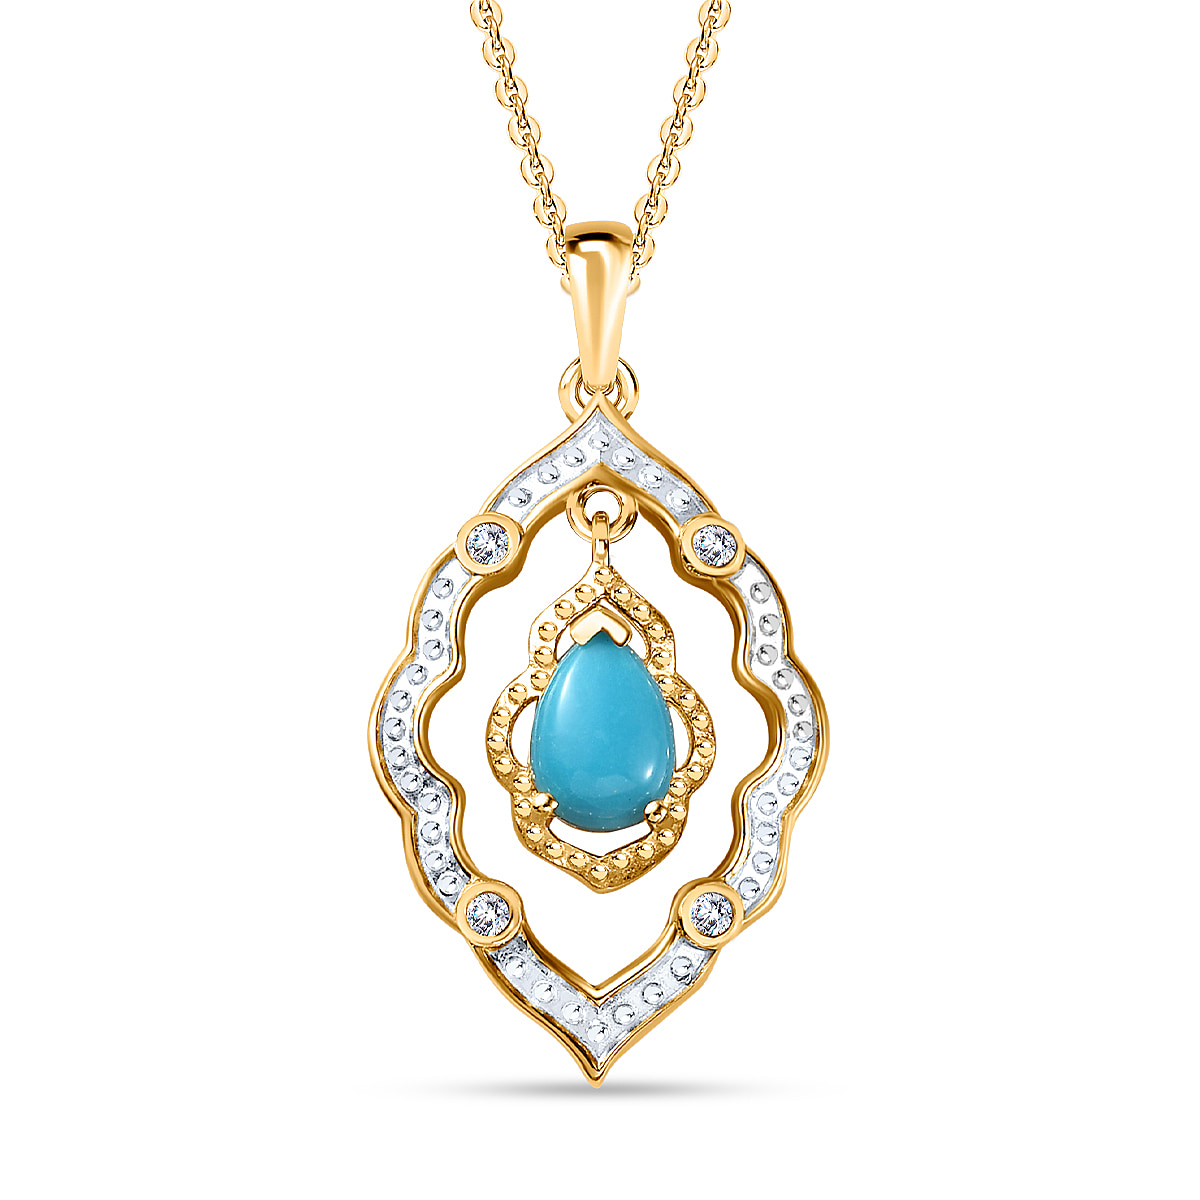 Arizona Sleeping Beauty Turquoise & Natural Zircon Pendant with Chain (Size 20) in 18K Vermeil YG Plated Sterling Silver, Silver Wt. 5.19 Gms